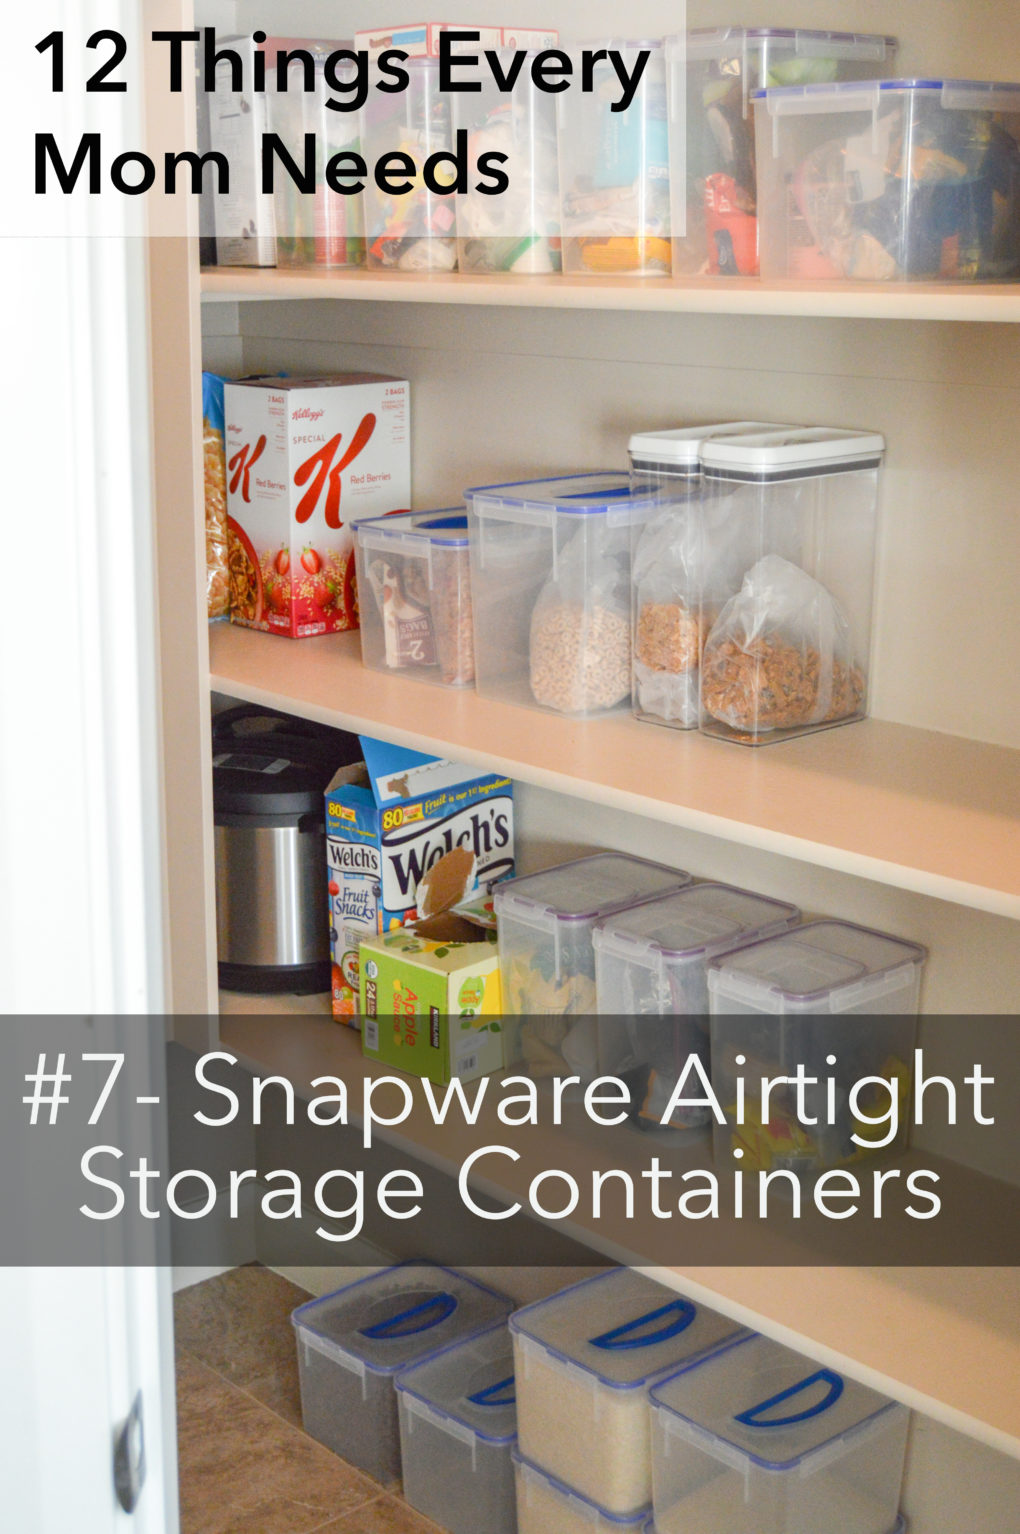 #7- snapware airtight food storage containers. List of 12 household things every mom needs. Gift ideas for mom. What a new mom needs.